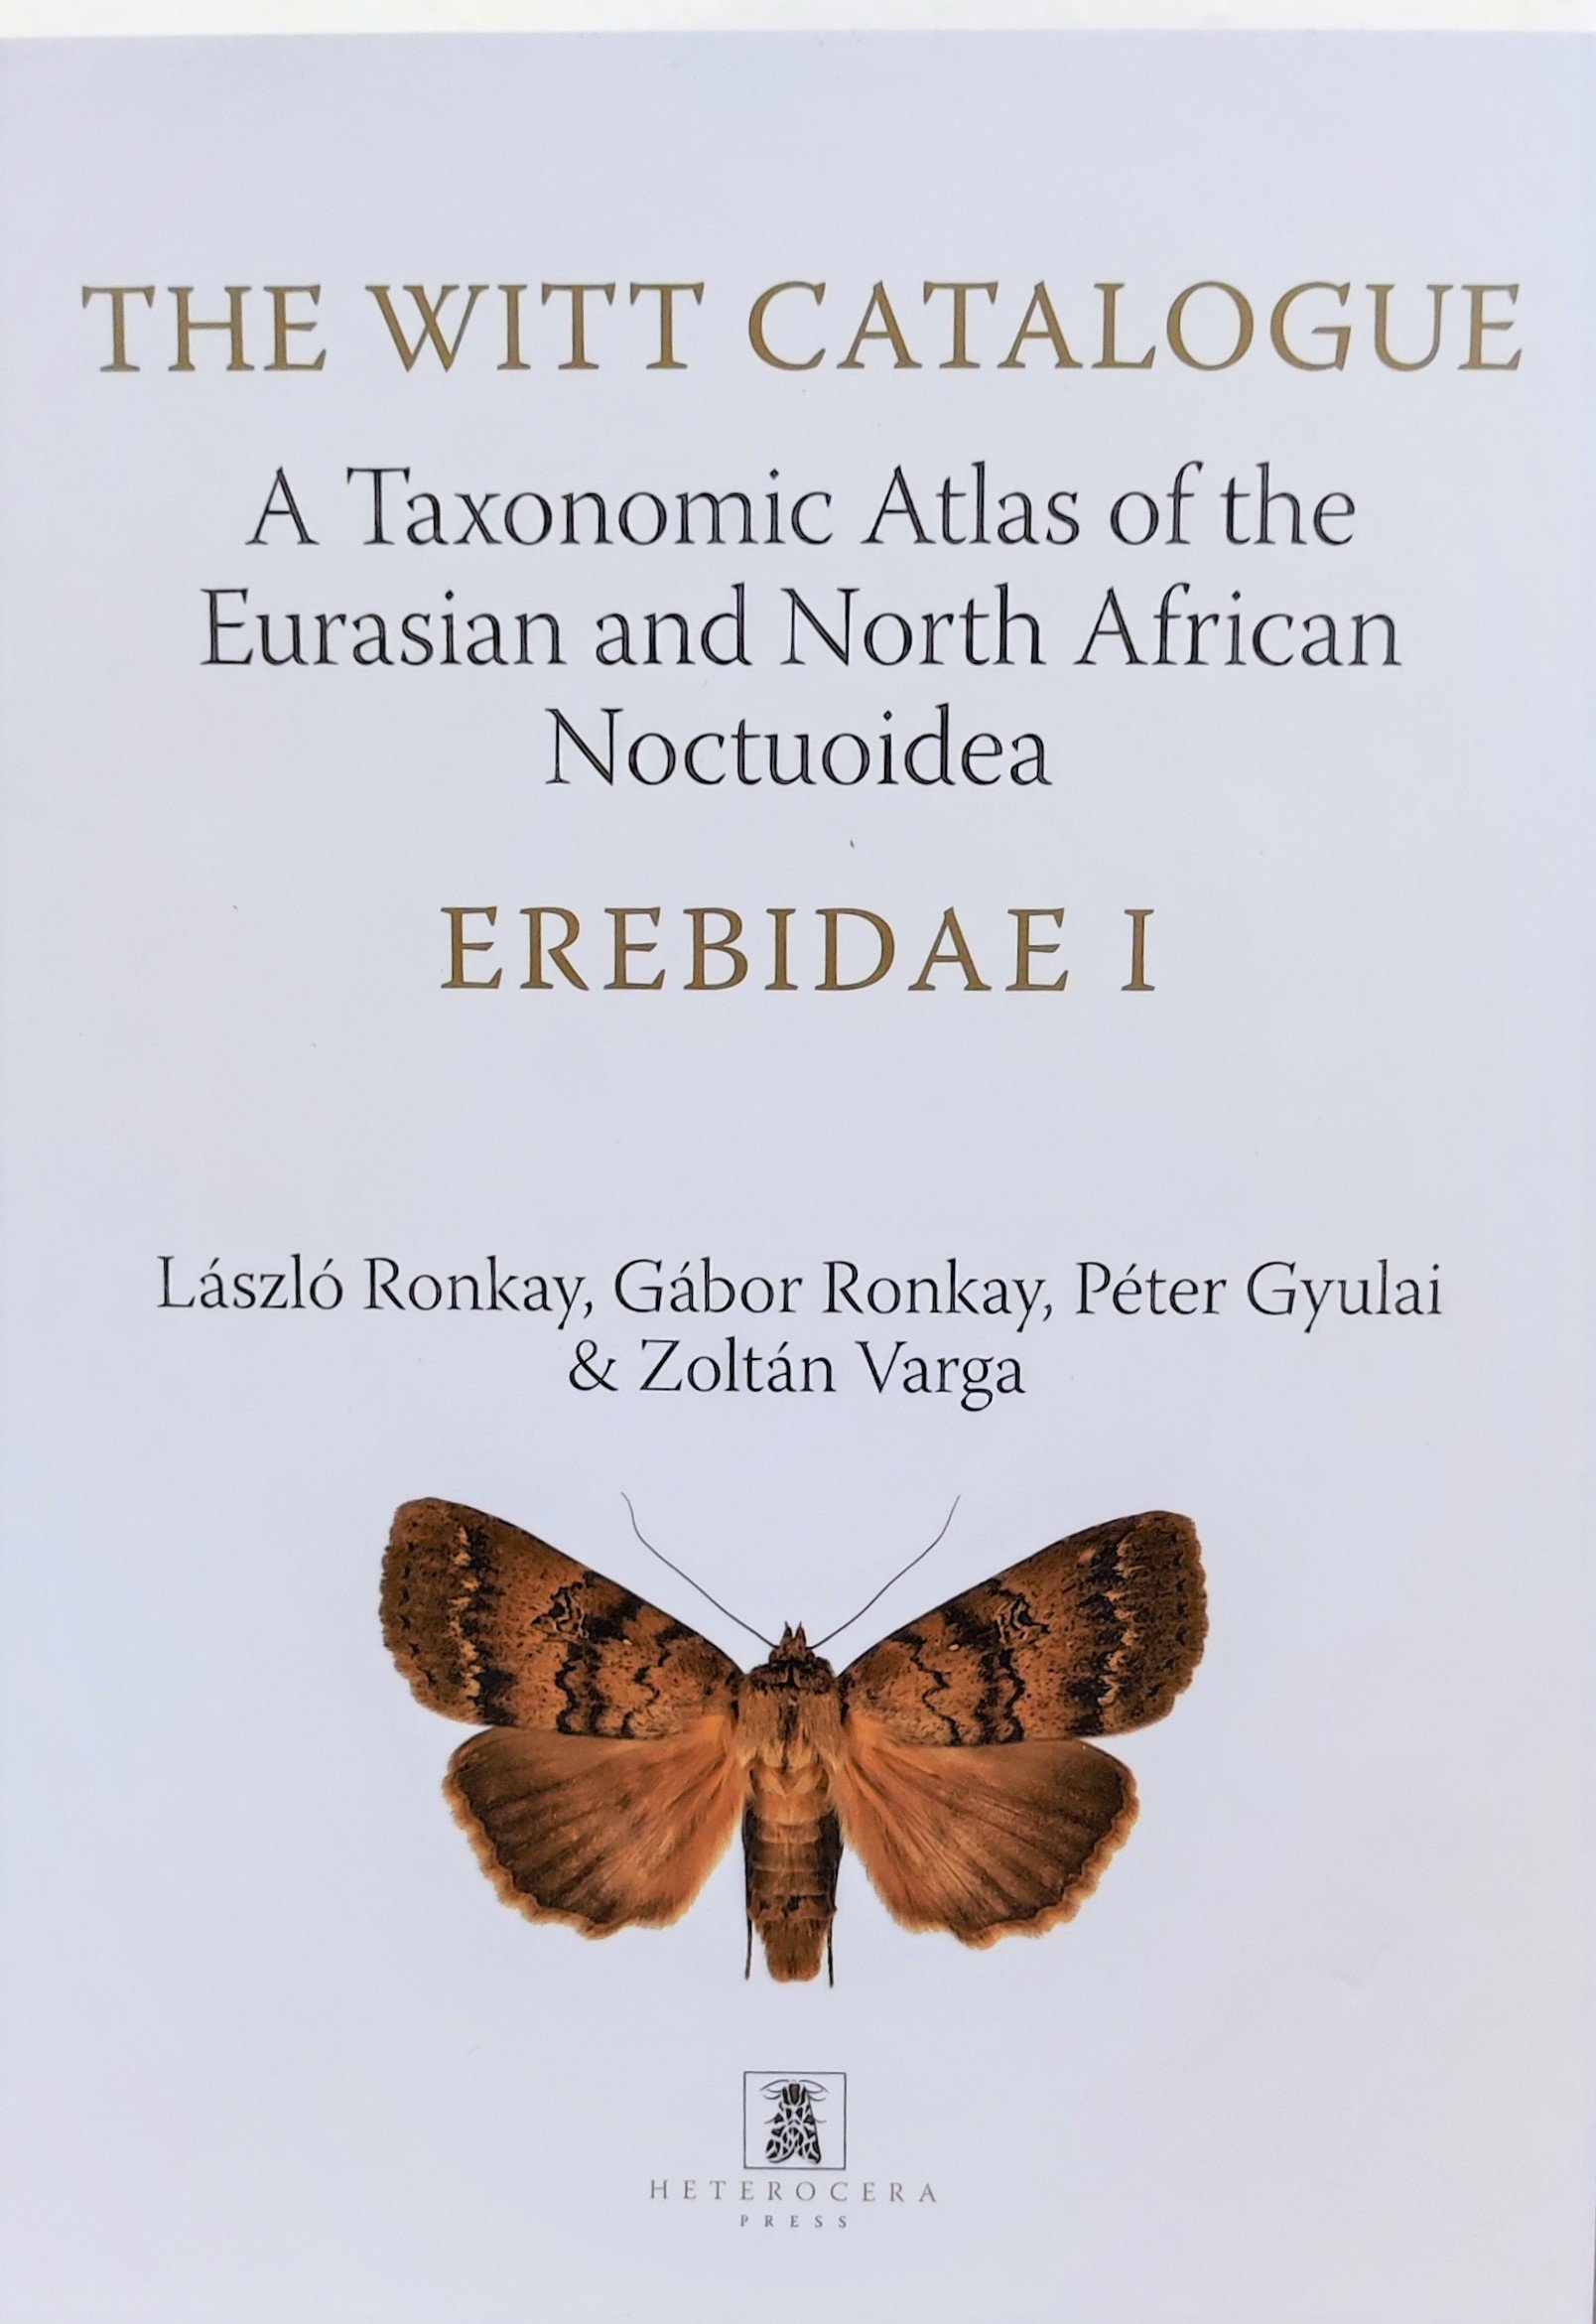 The Witt Catalogue: A Taxonomic Atlas of the Eurasian and North African Noctuoidea. volume 7. - Erebidae 1. (Rippl-Rónai Múzeum CC BY-NC-ND)